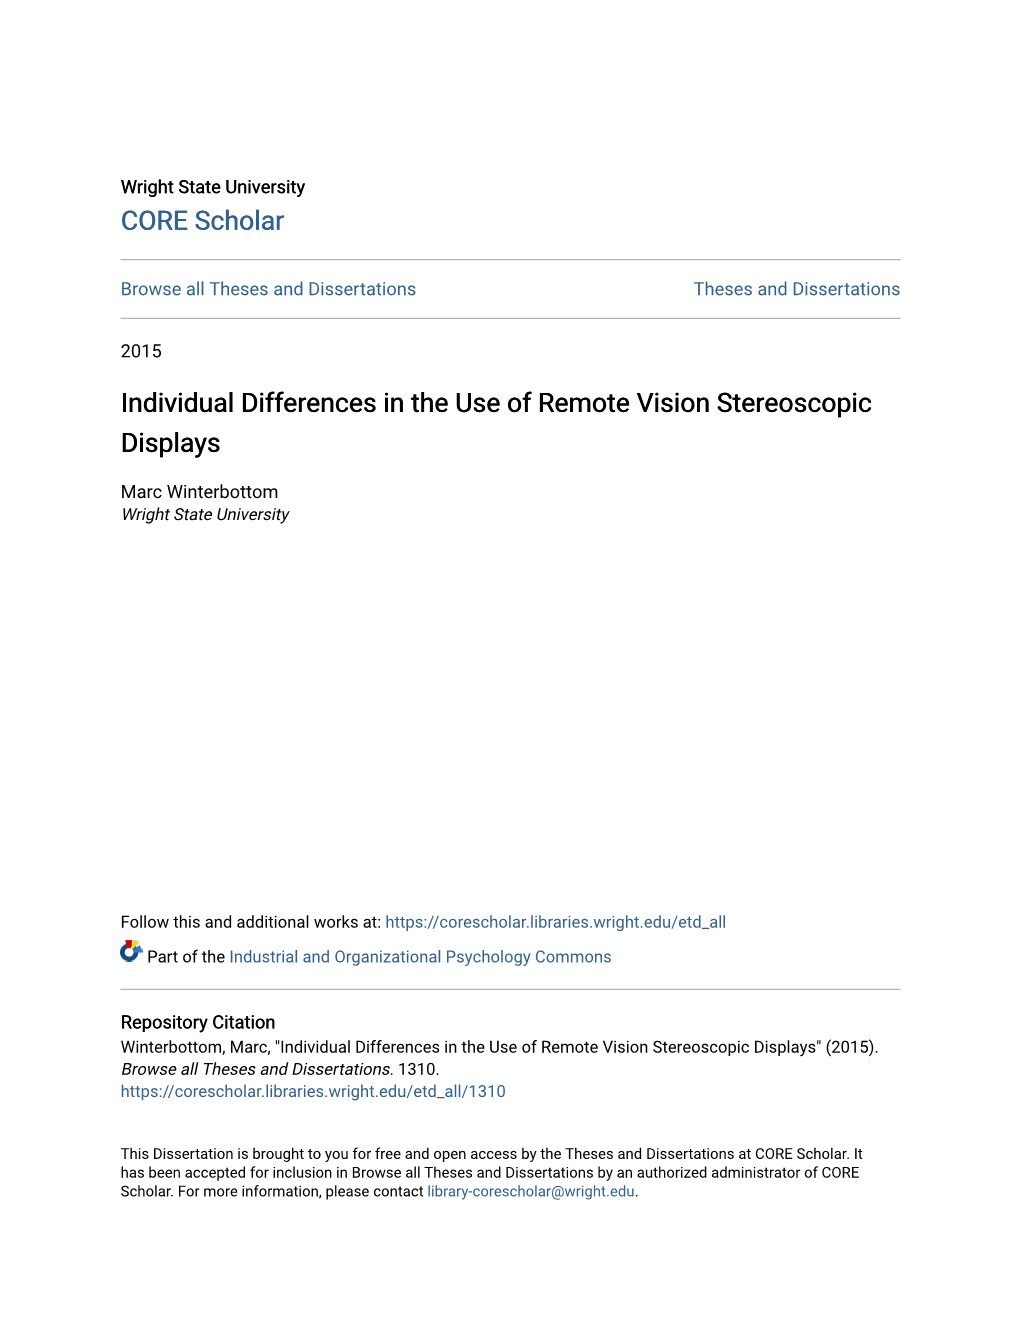 Individual Differences in the Use of Remote Vision Stereoscopic Displays